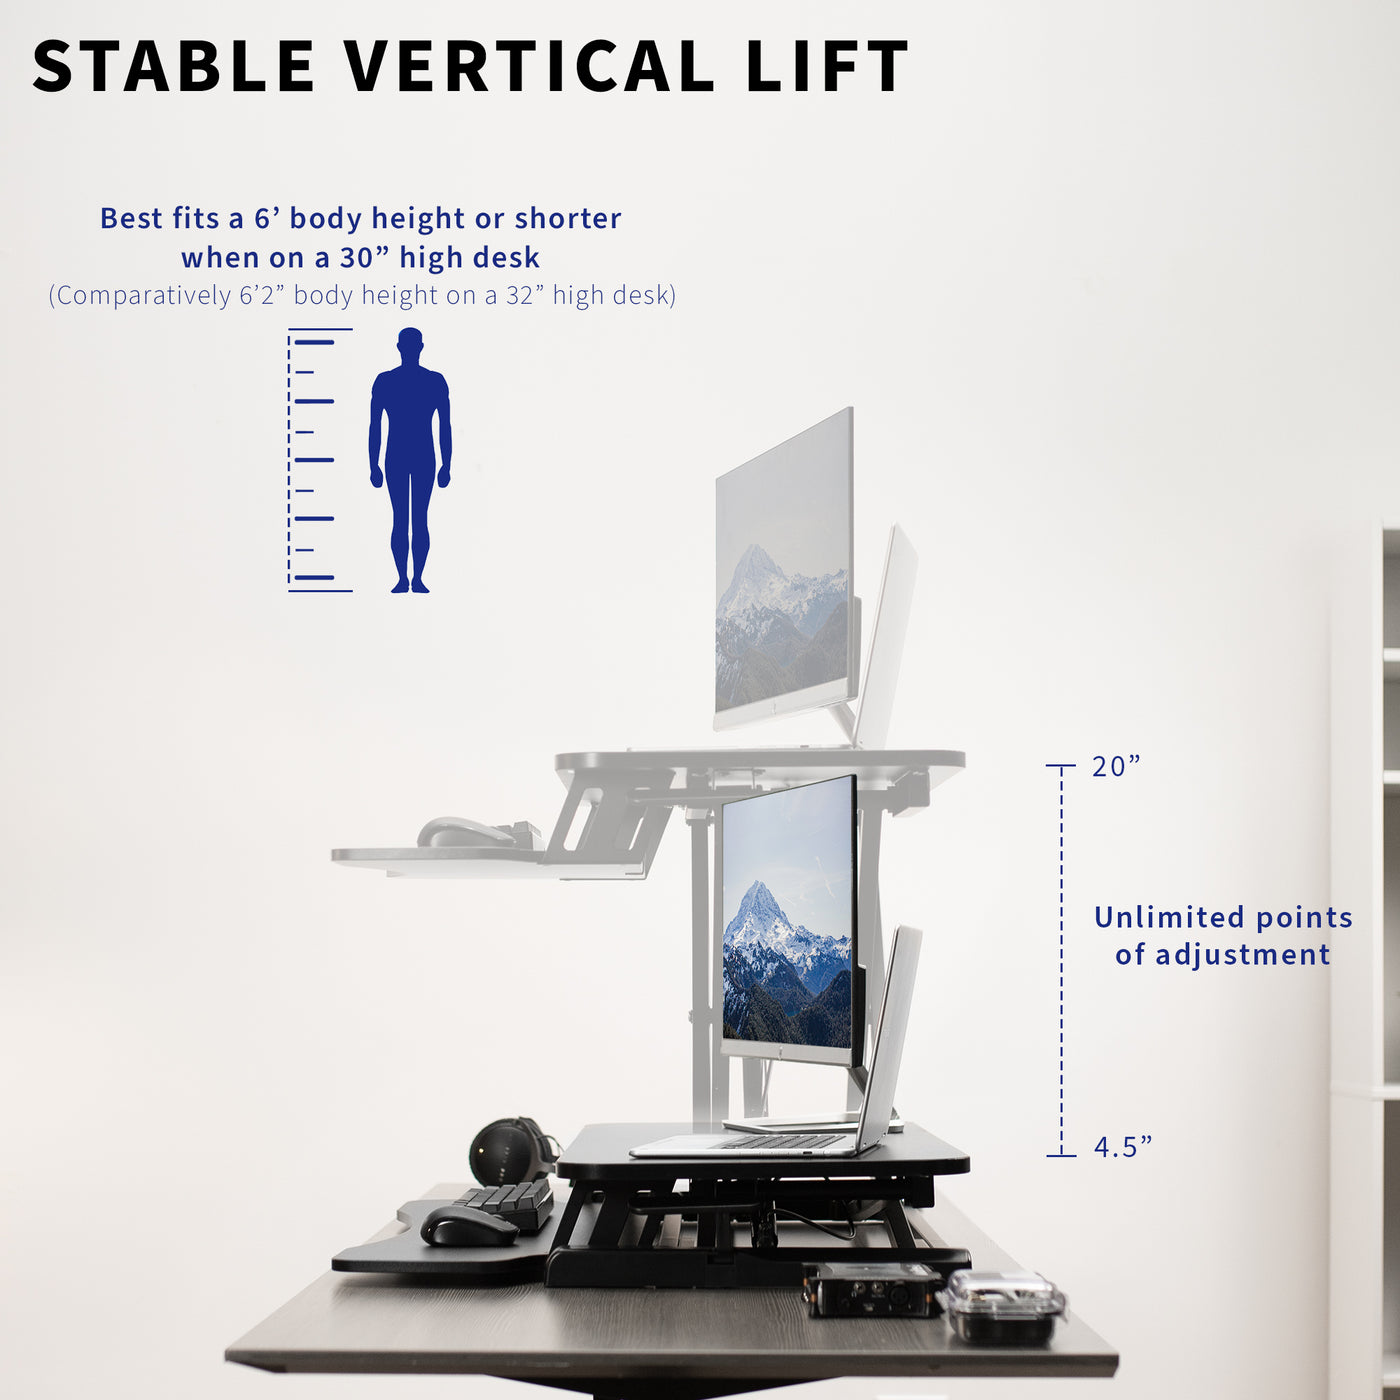 Sit or stand while working at the most comfortable height for you with 20 inches of unlimited adjustment points.